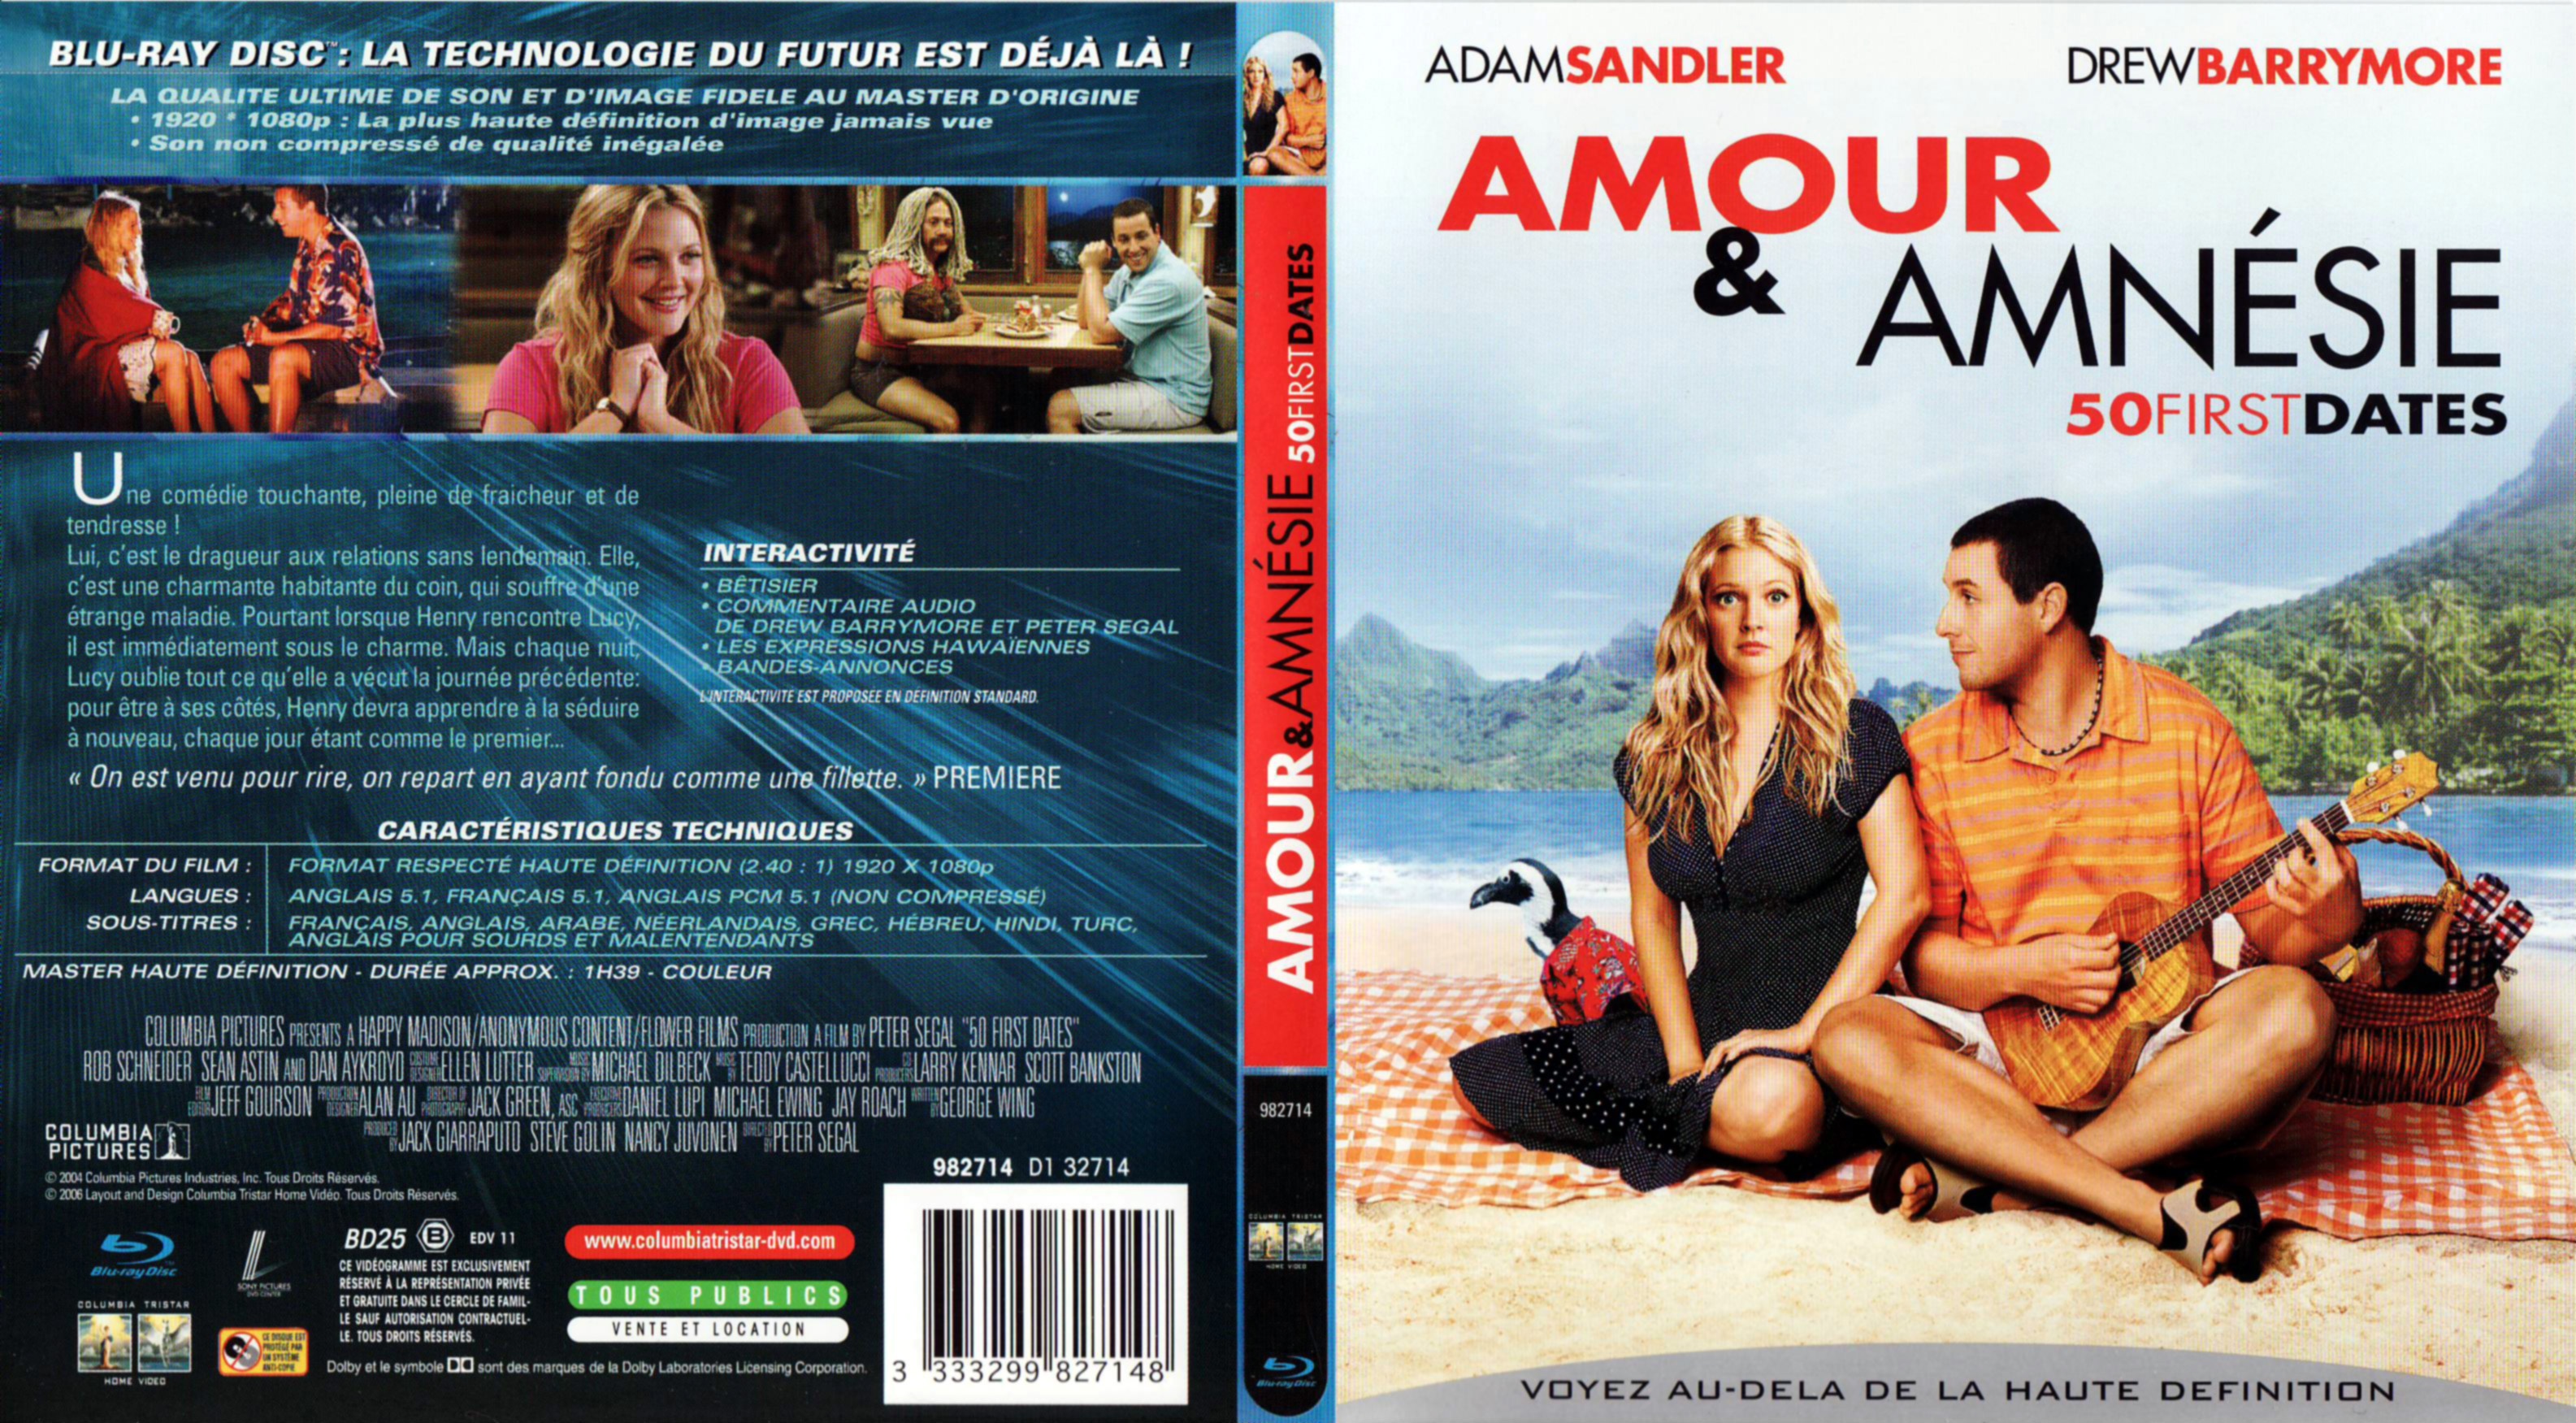 Jaquette DVD Amour et amnsie (BLU-RAY)